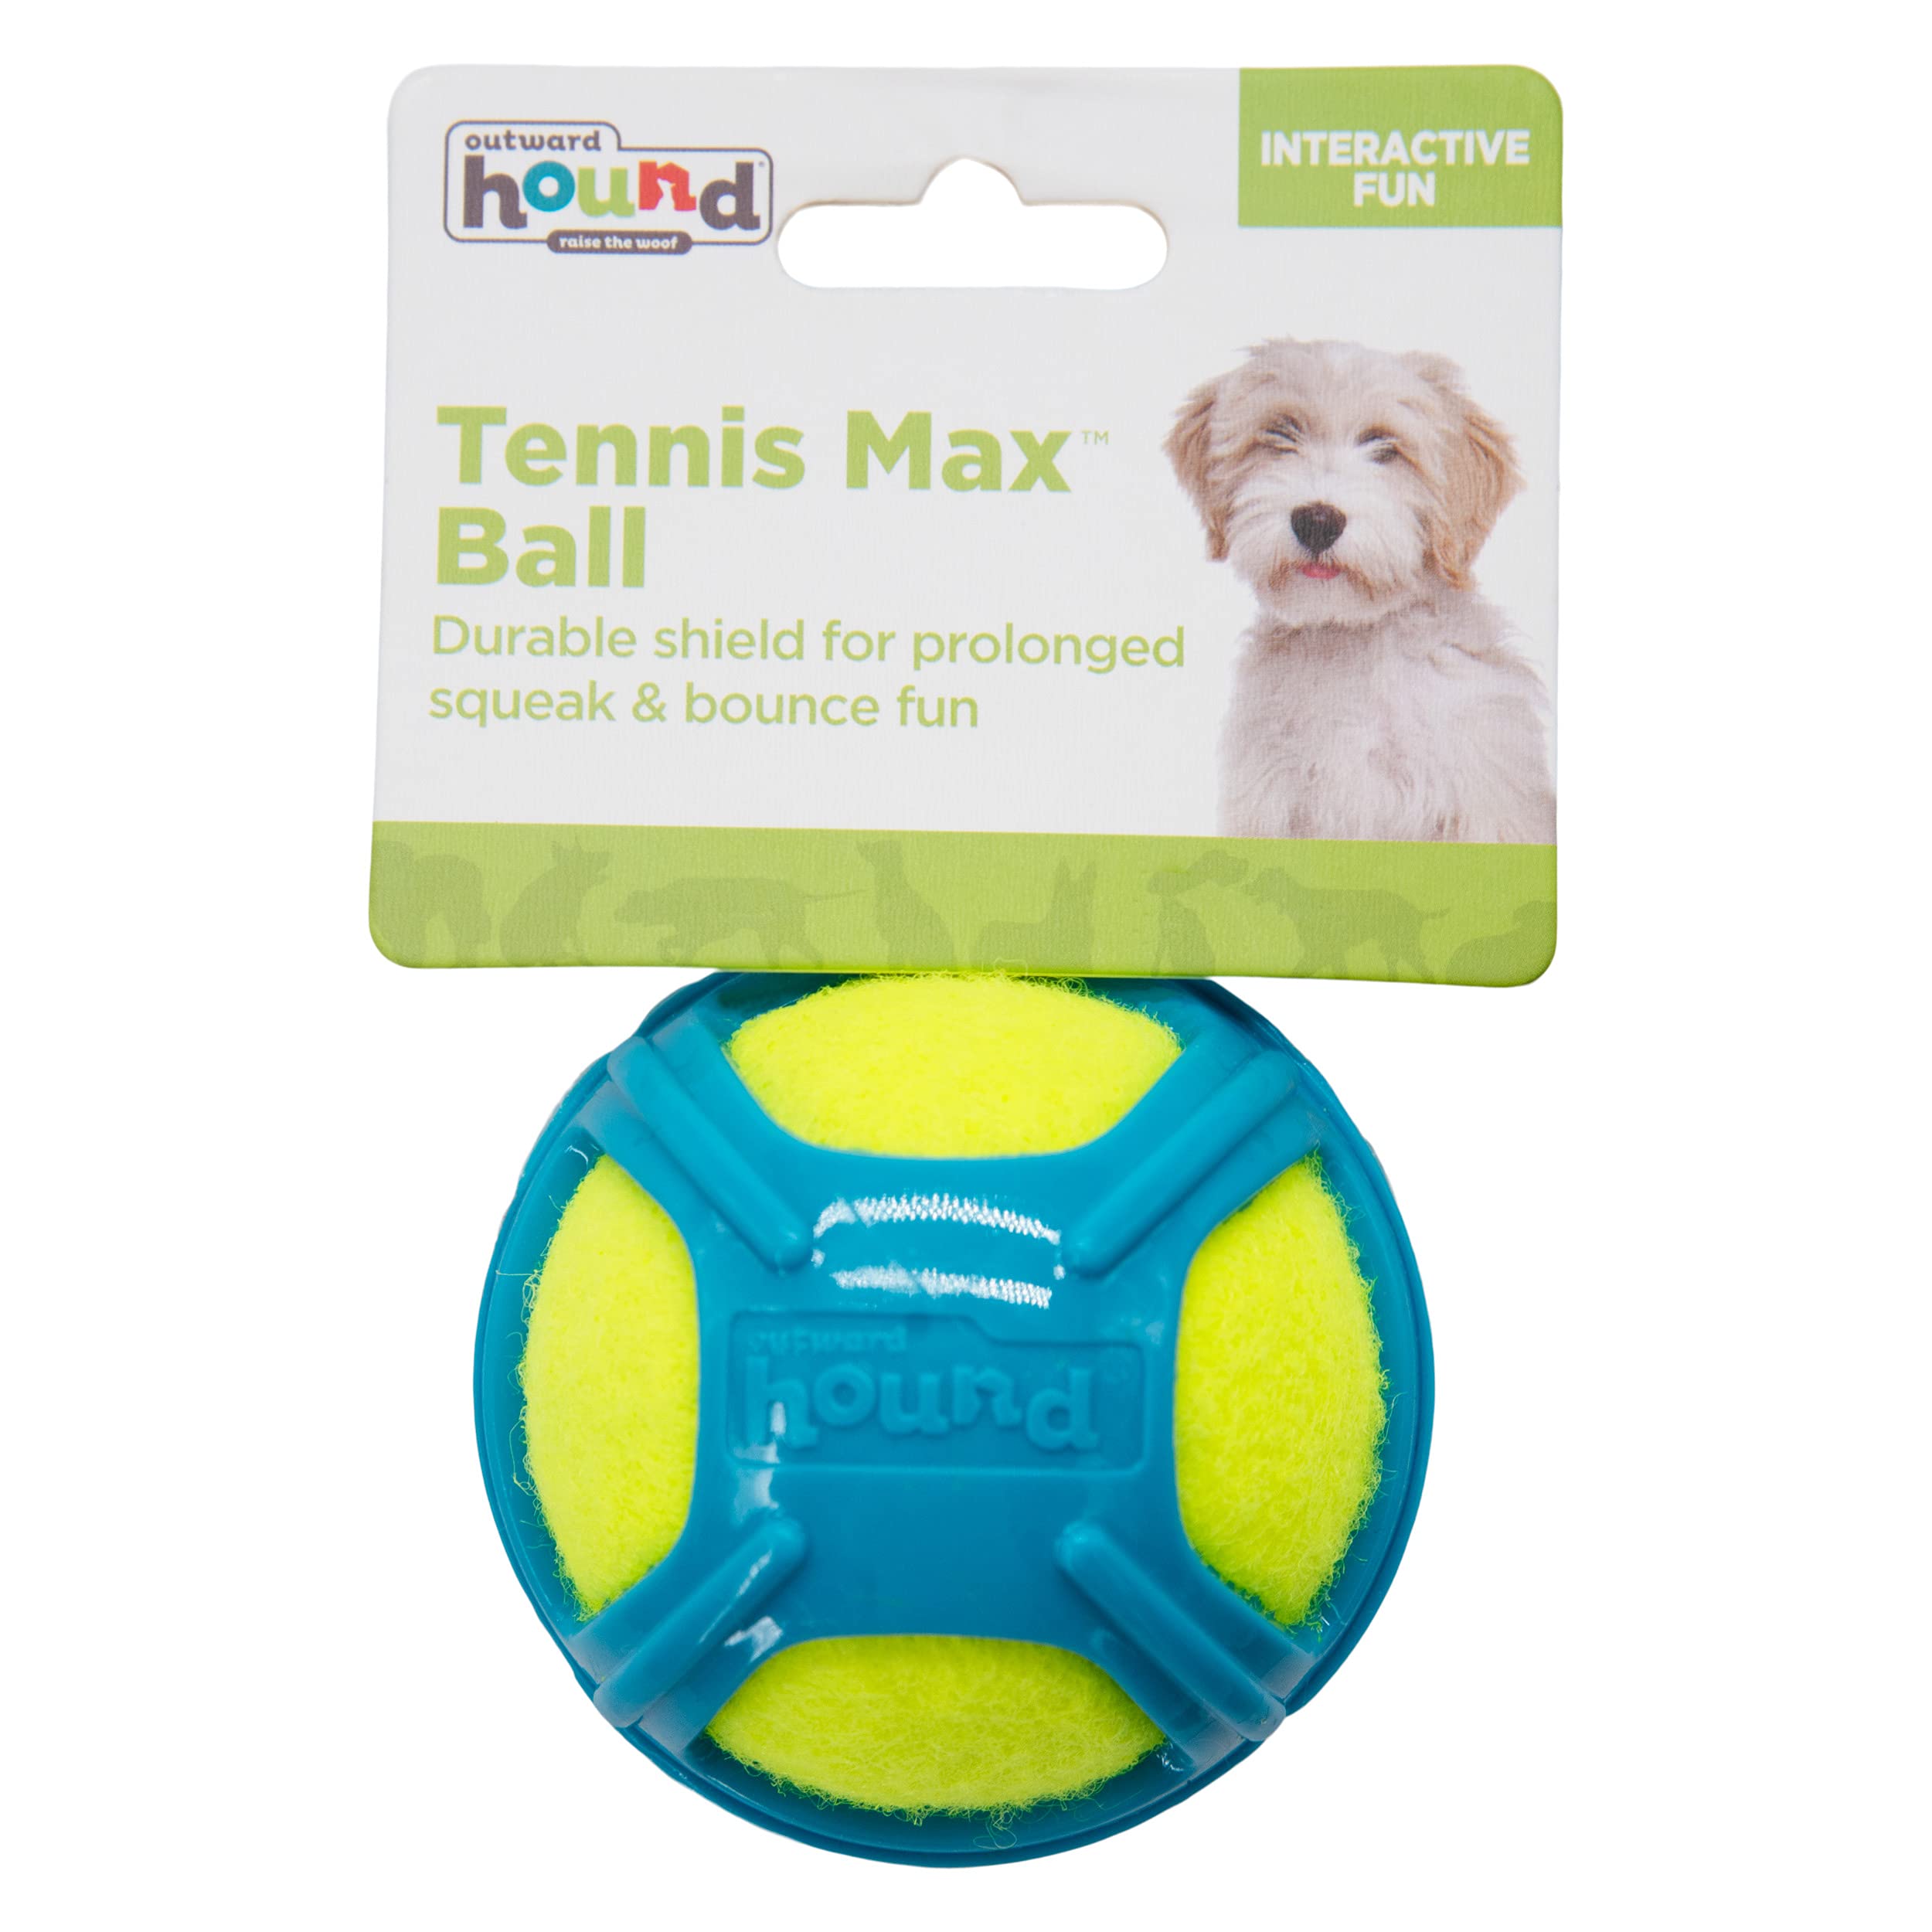 Outward Hound Tennis Max Ball Dog Toy (Blue) $3.75 + Free Shipping w/ Prime or on $25+